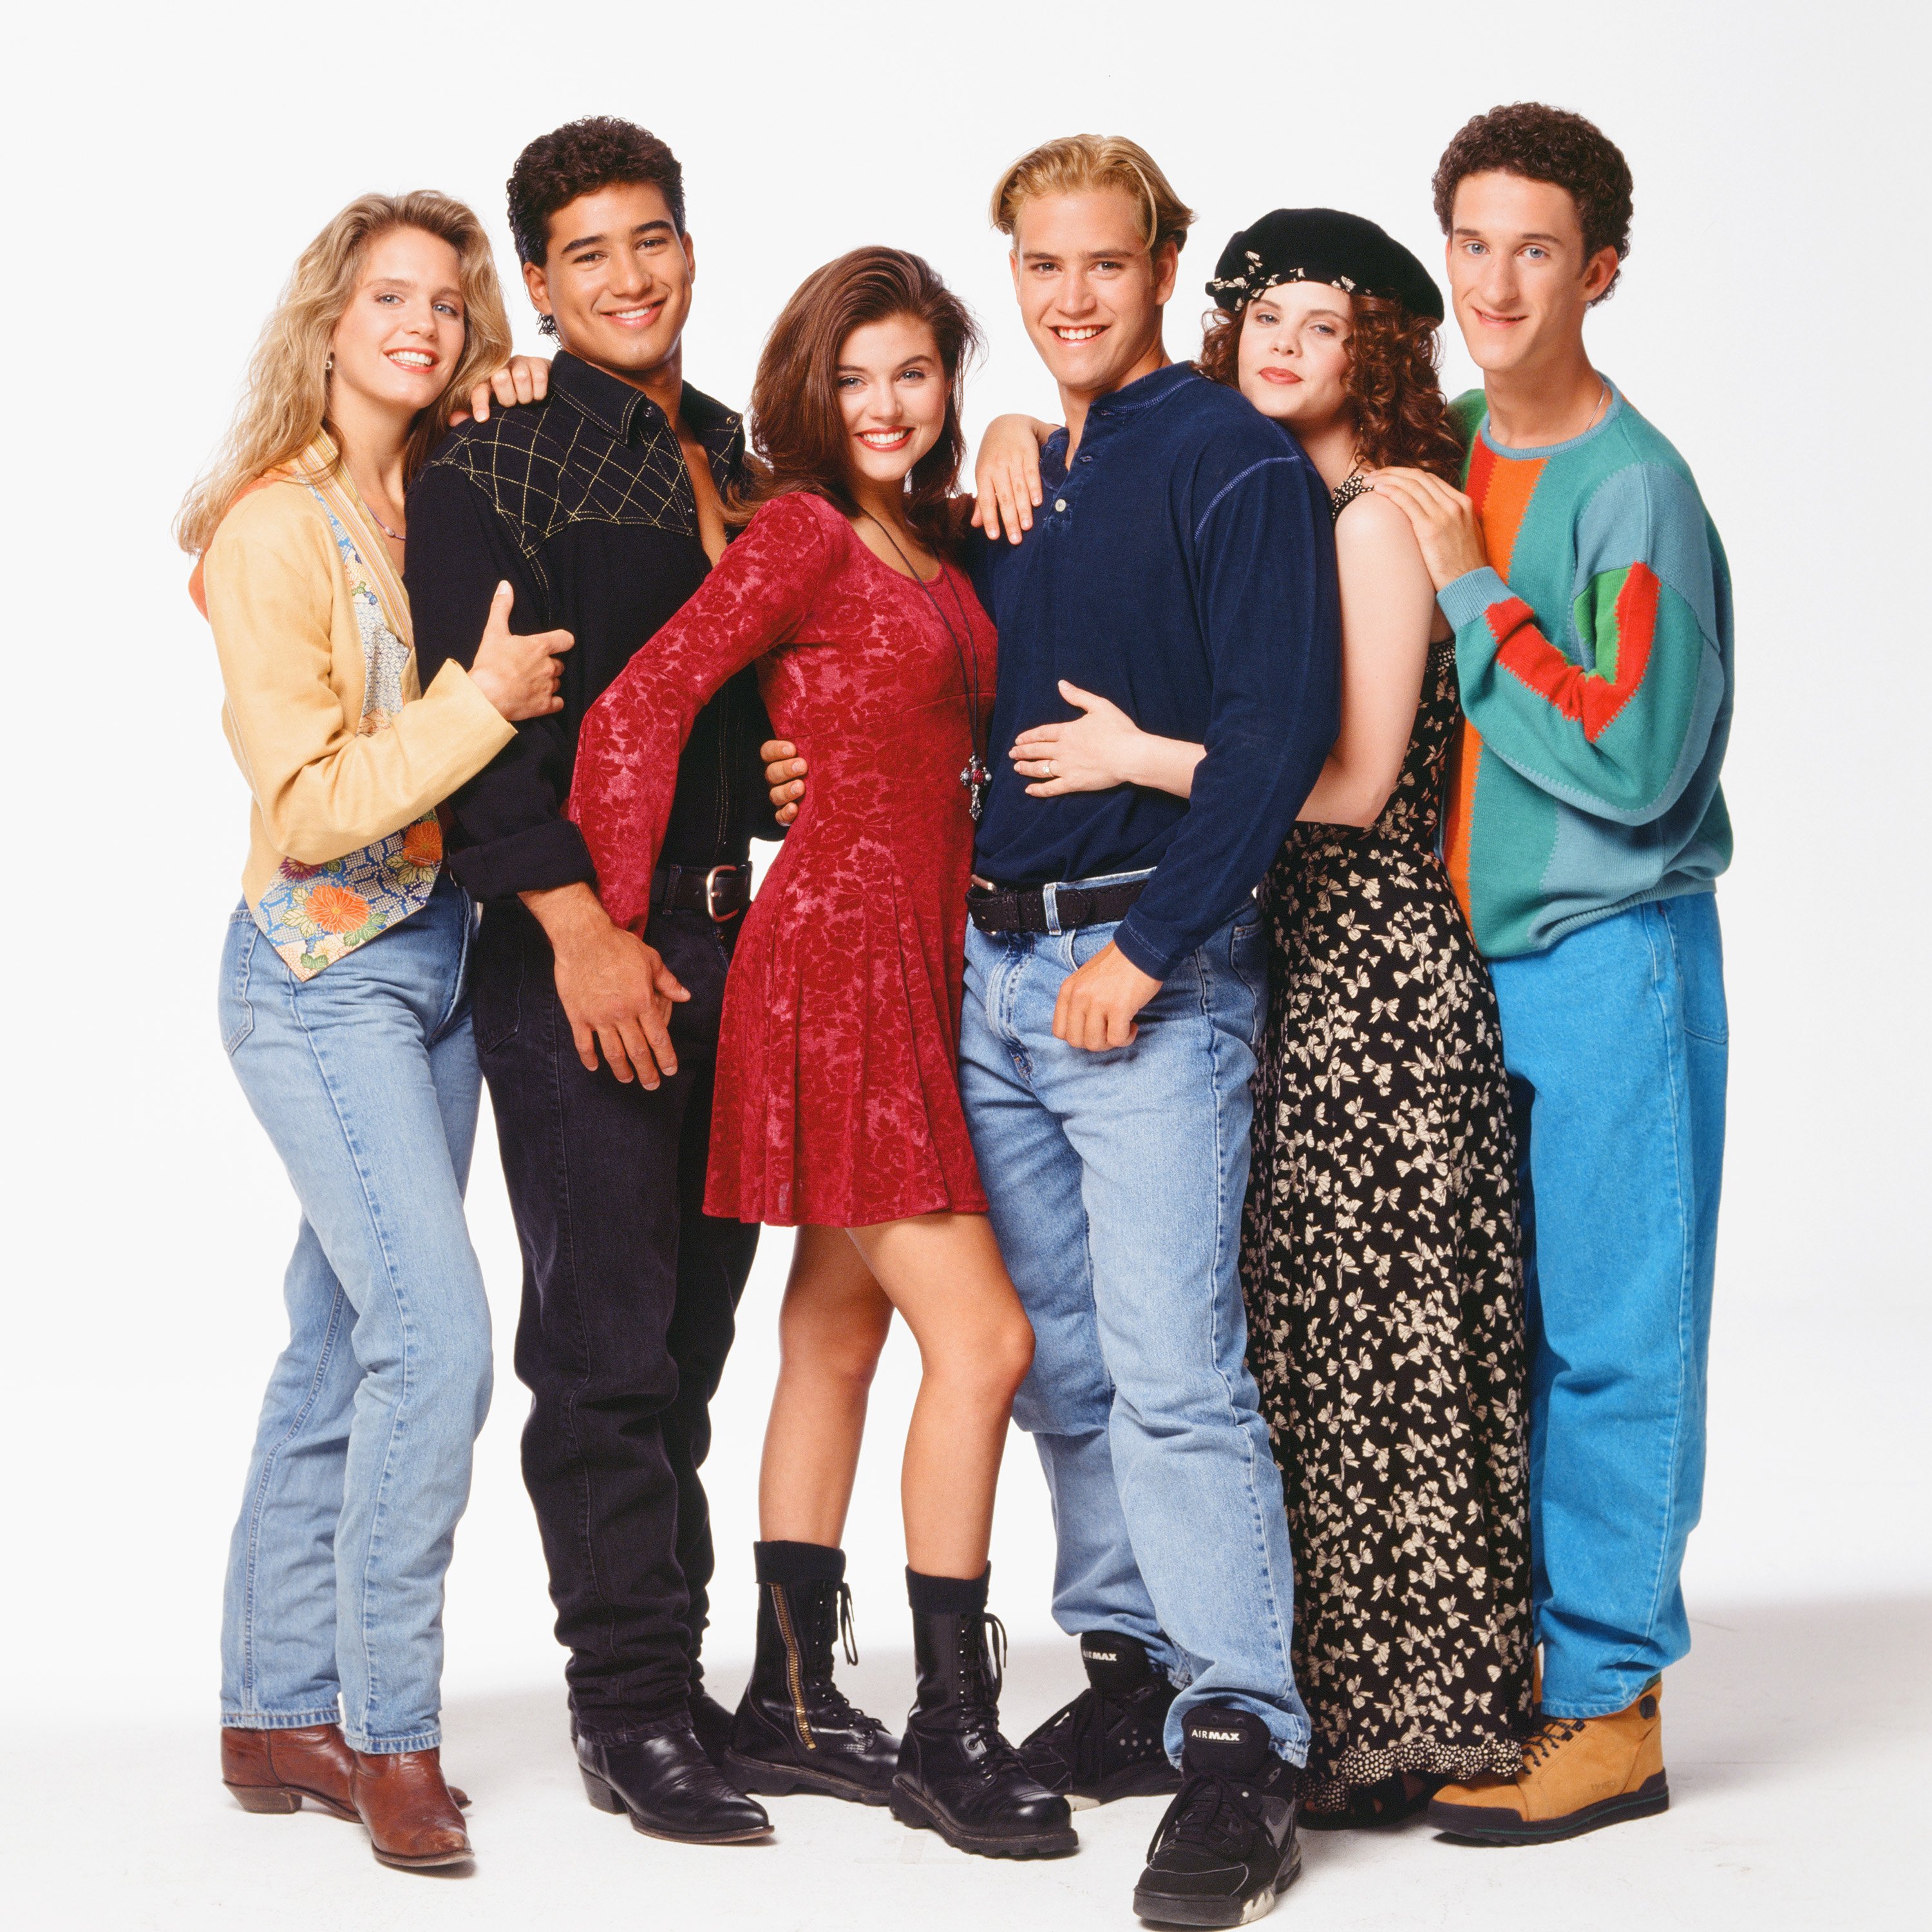 Anne Tremko, Mario Lopez, Tiffani Thiessen, Mark-Paul Gosselaar, Kiersten Warren and Dustin Diamond pose for promotional material for 'Saved by the Bell: The College Years'